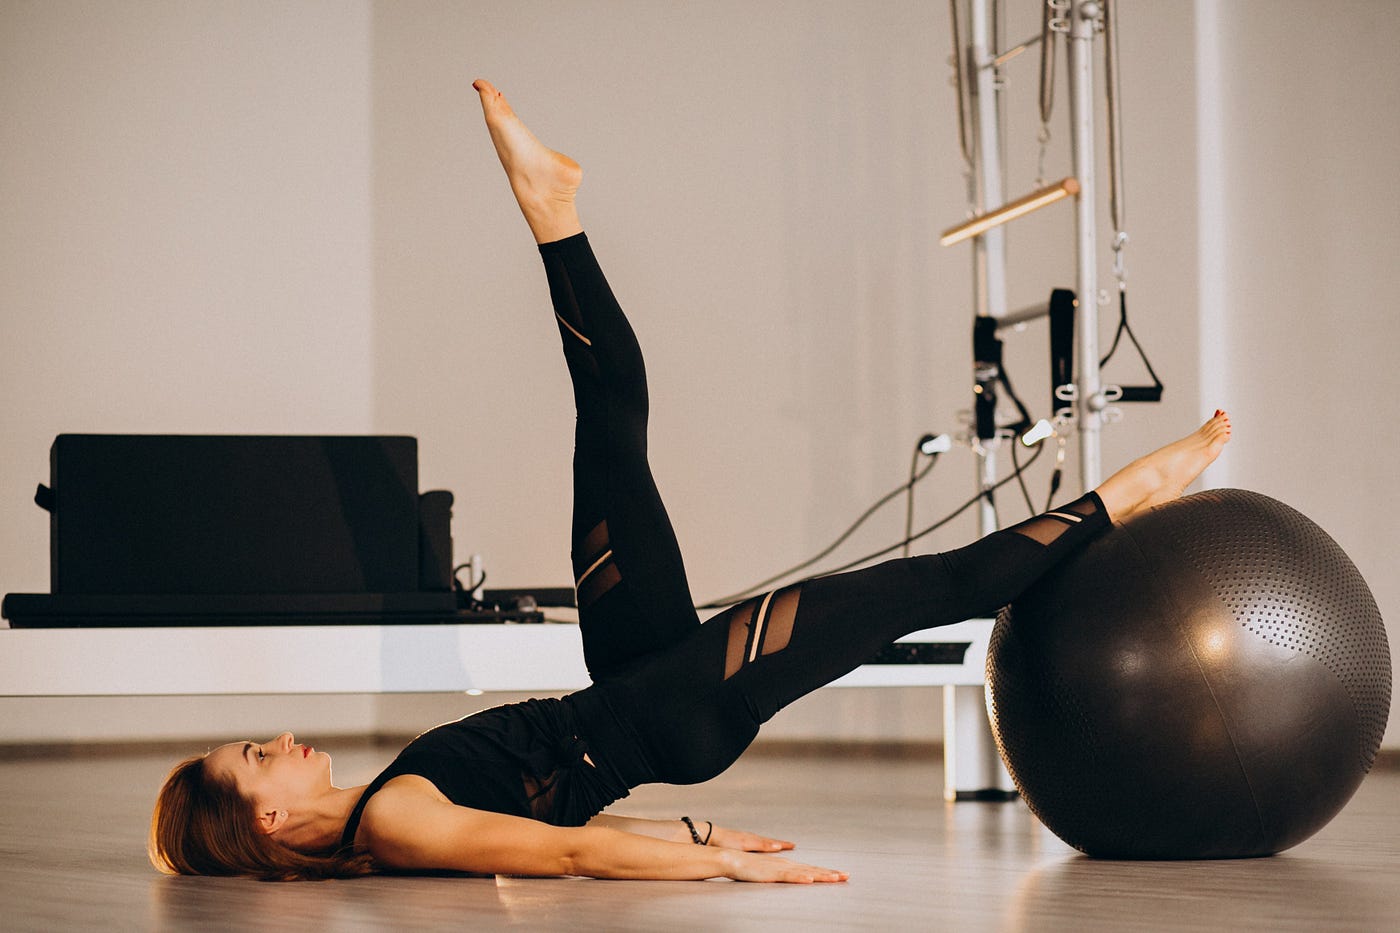 Why is pilates so effective?. Pilates has taken the fitness world